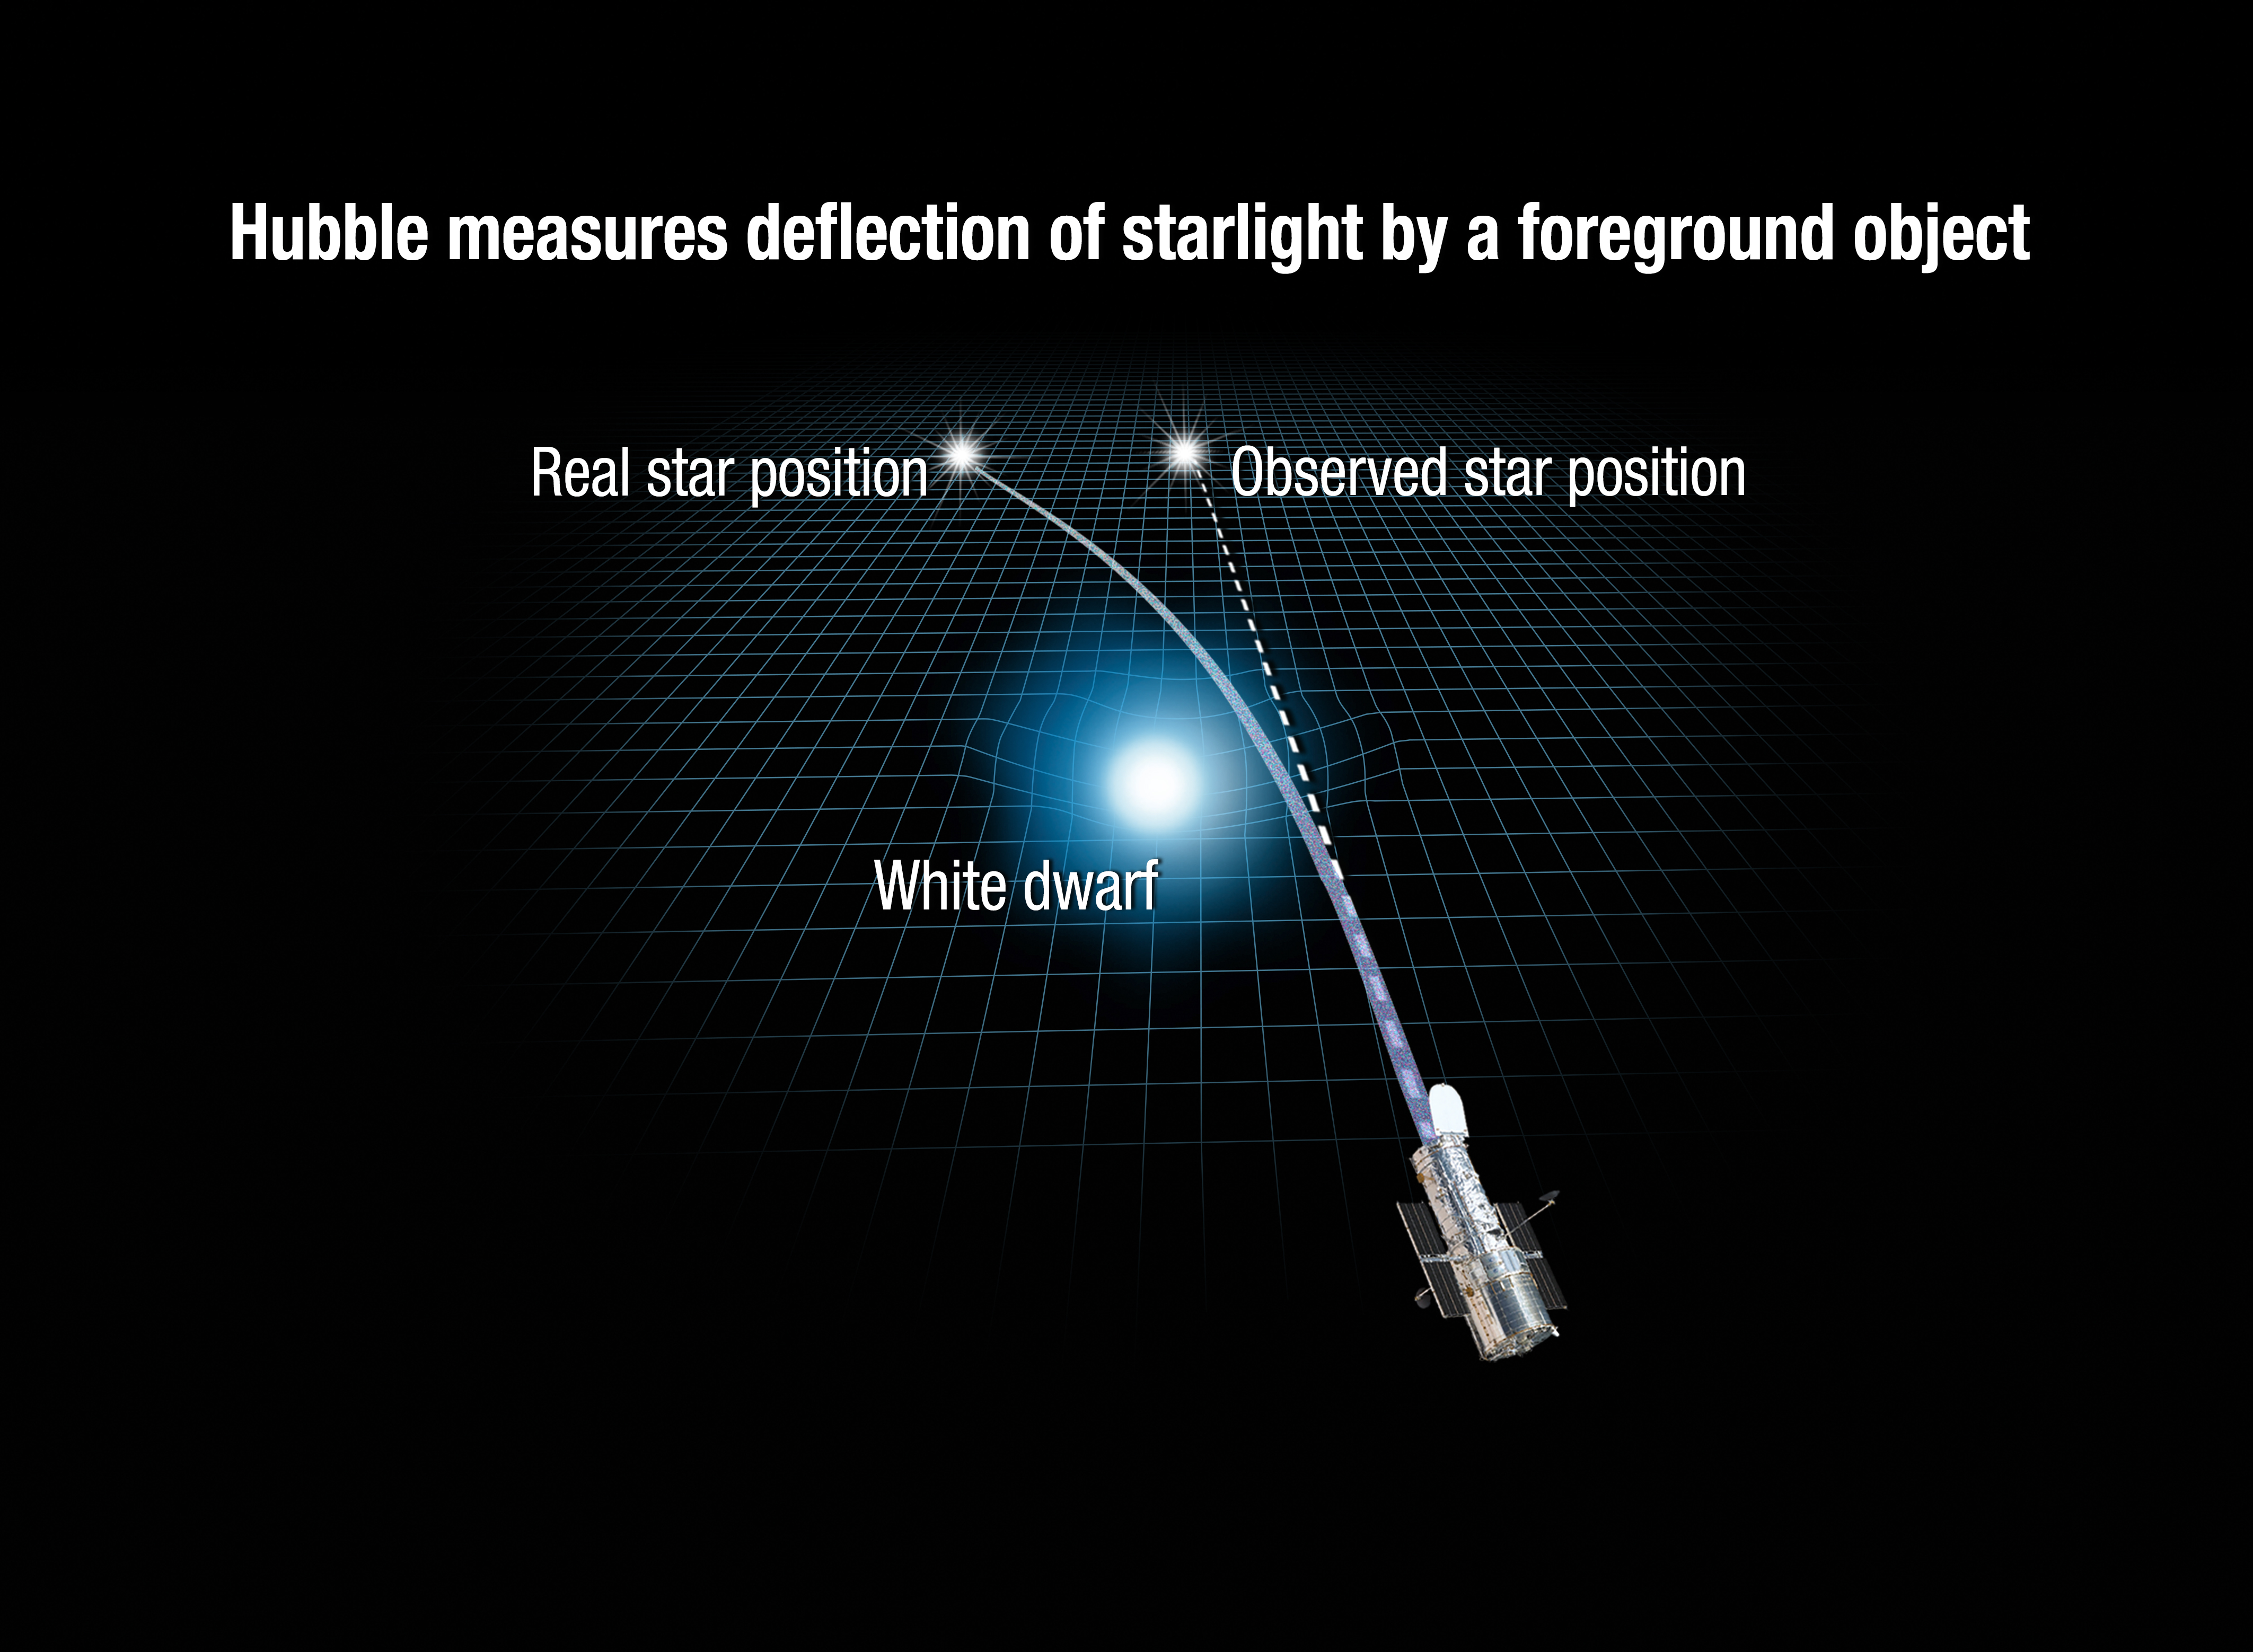 This illustration reveals how the gravity of a white dwarf star warps space and bends the light of a distant star behind it.